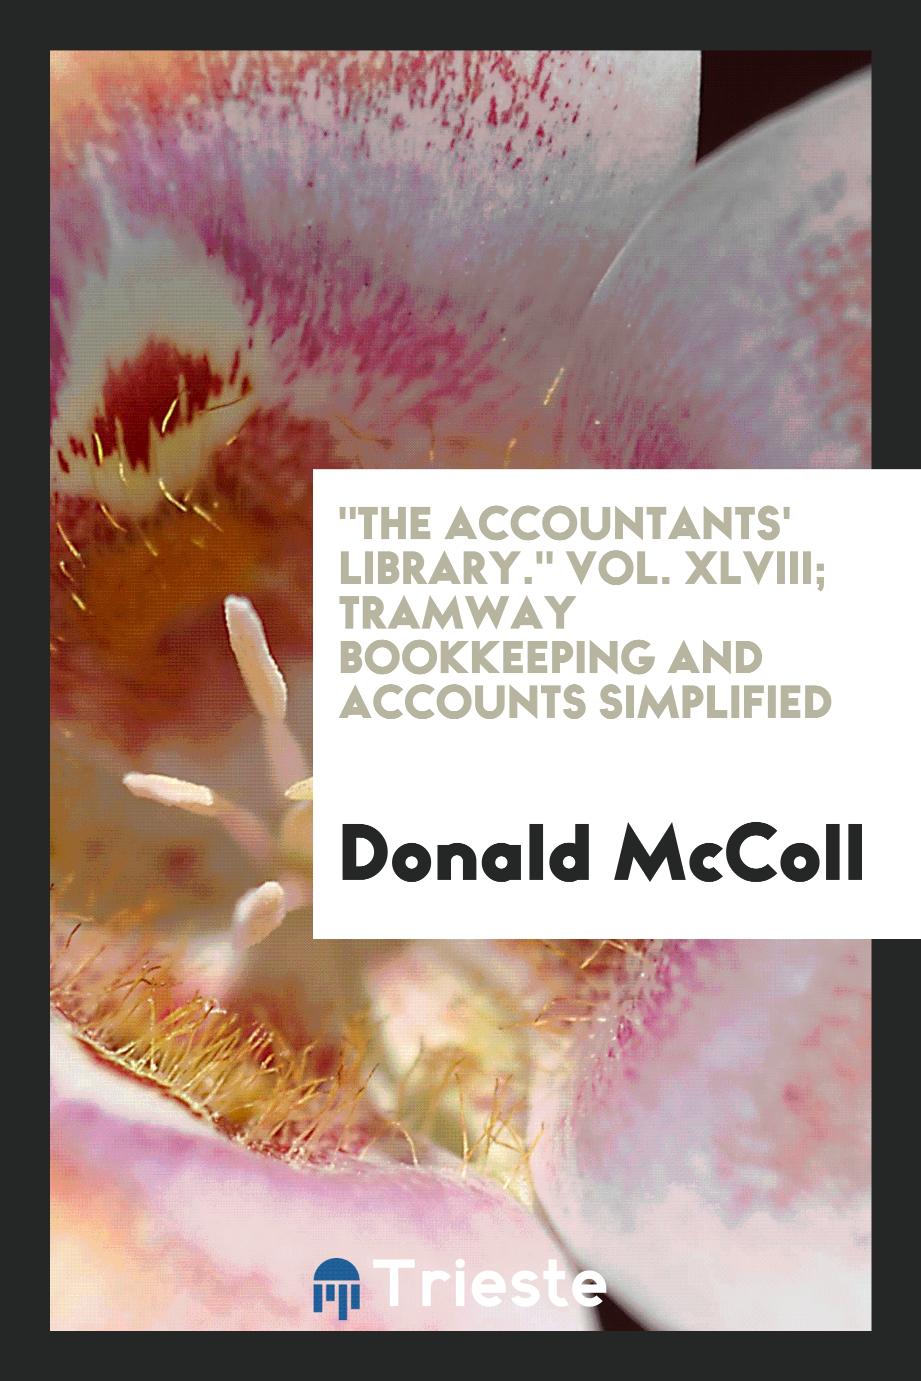 "The accountants' library." Vol. XLVIII; Tramway Bookkeeping and Accounts Simplified